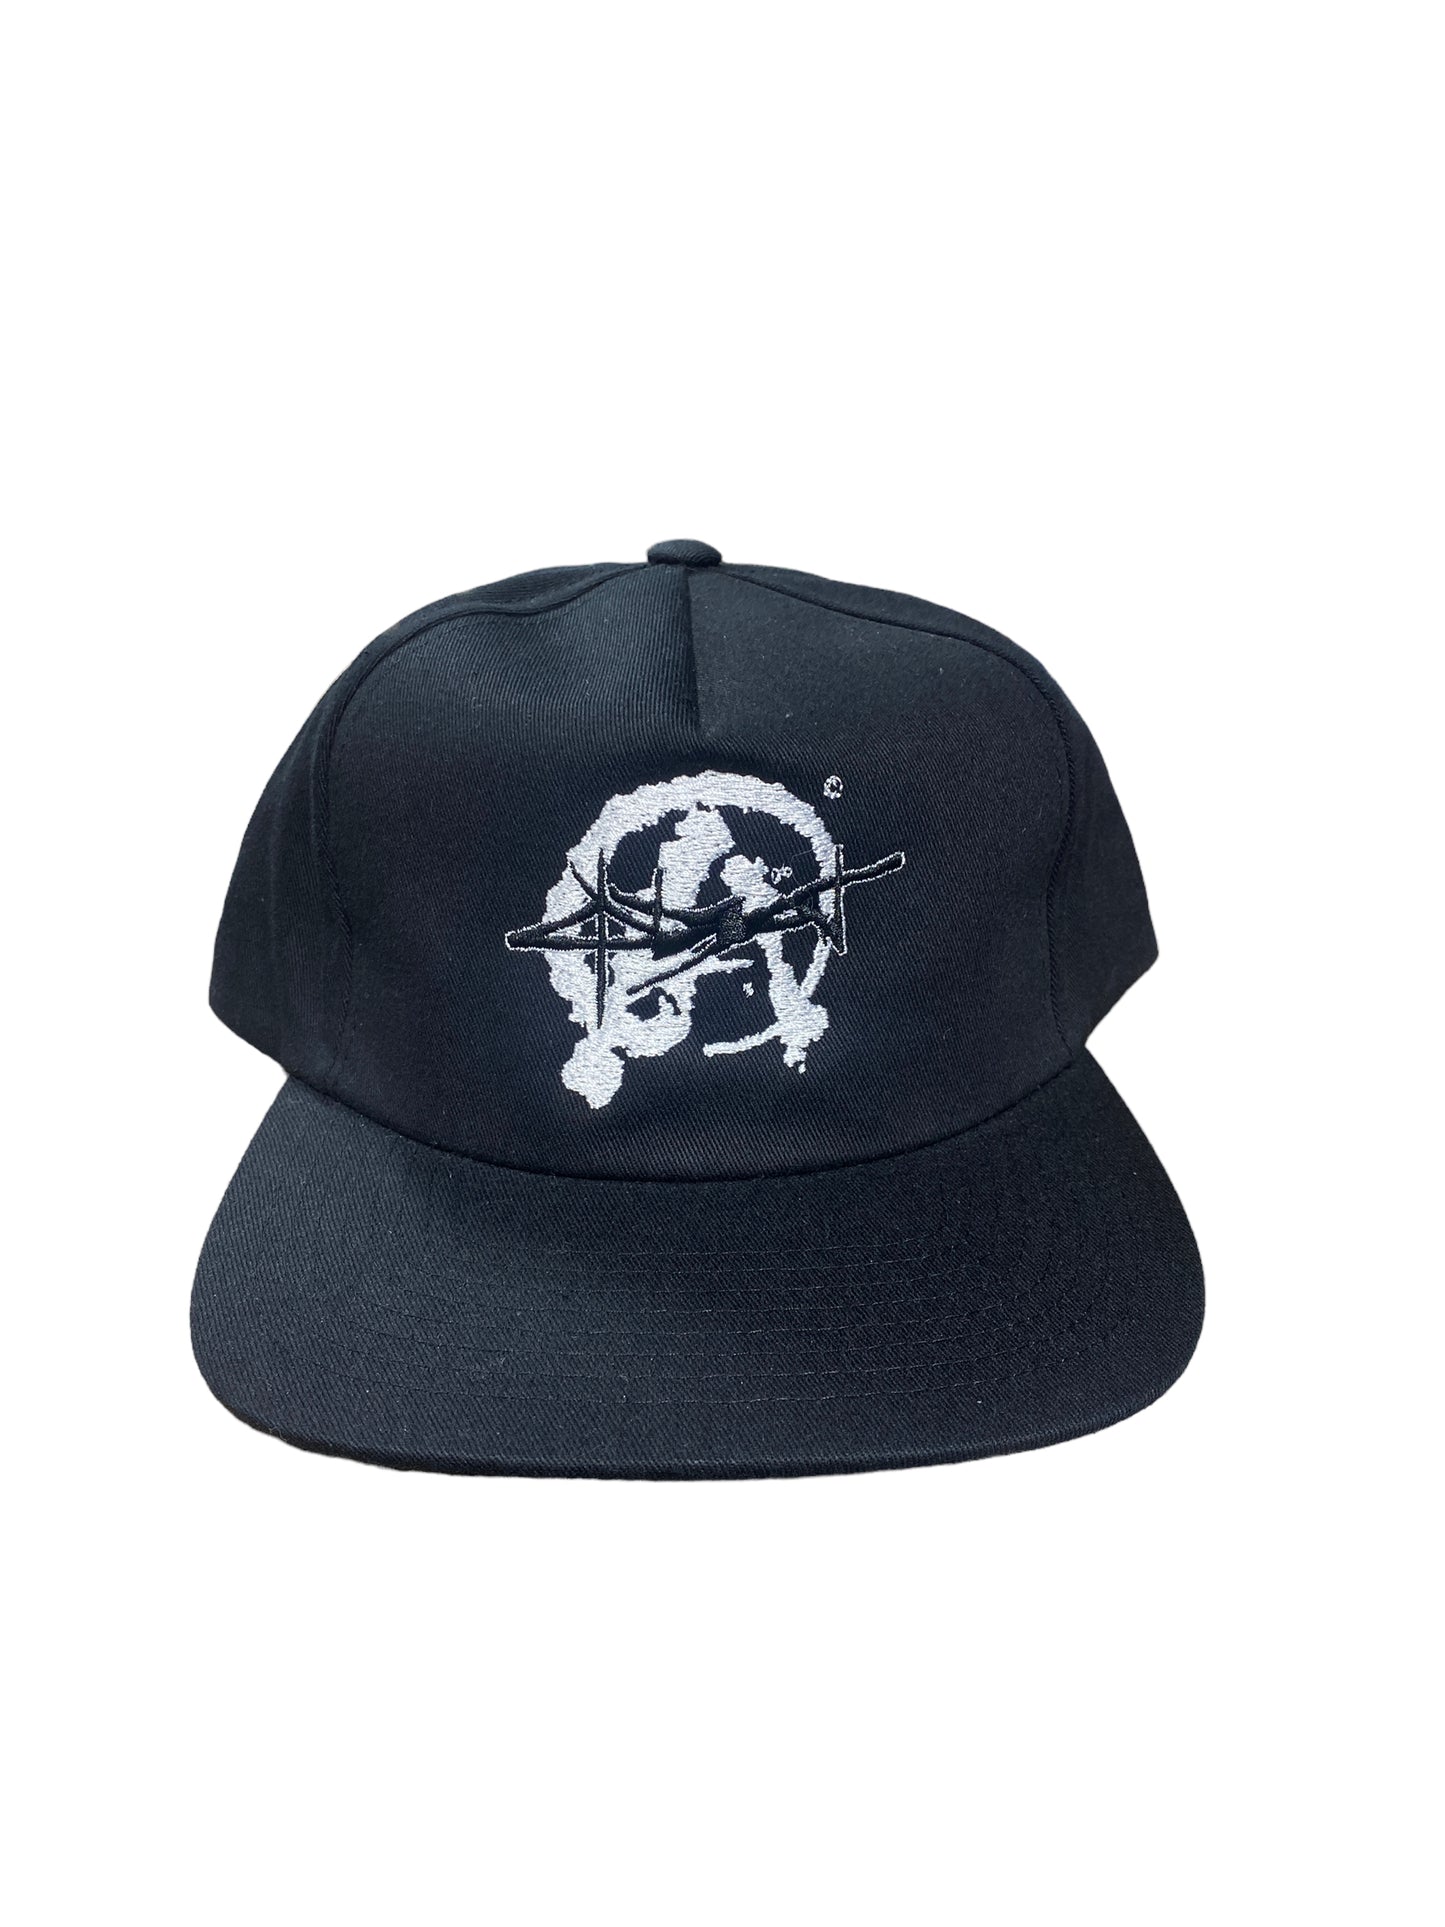 Absent Anarchy A Logo Snapback Hat